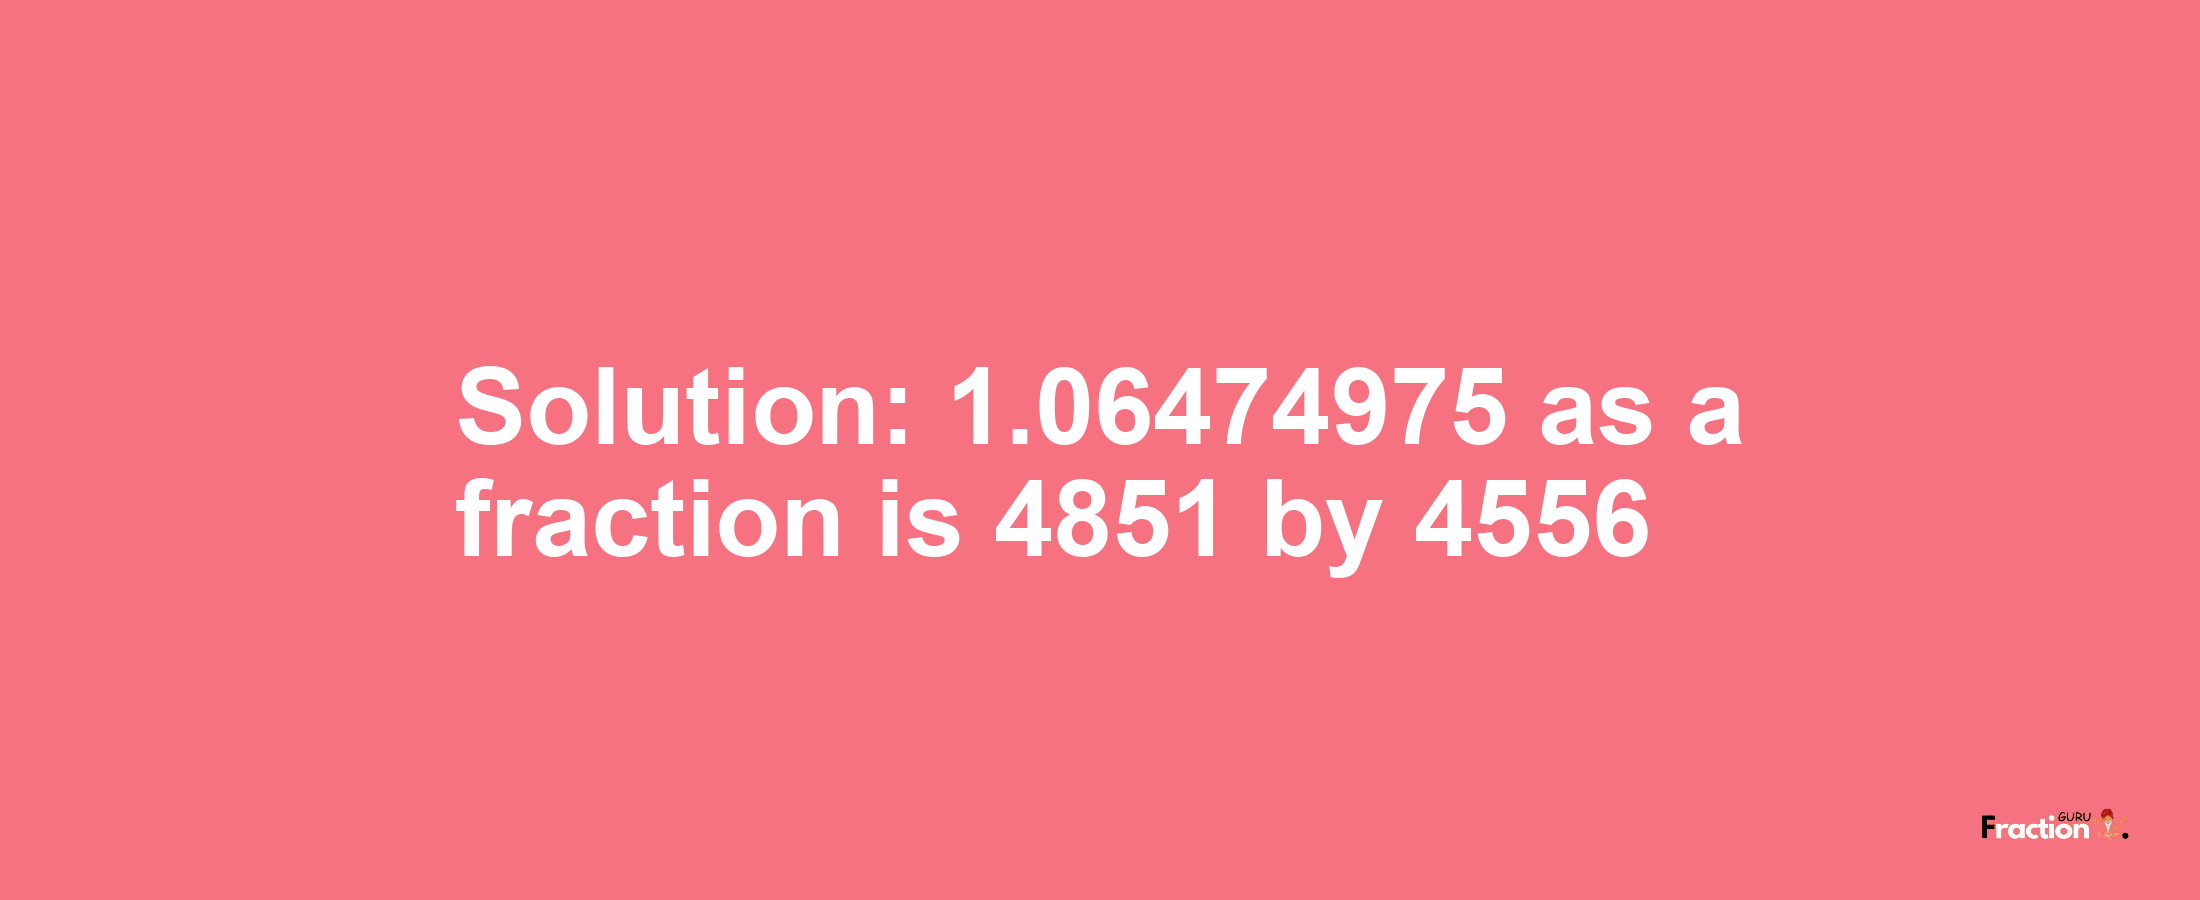 Solution:1.06474975 as a fraction is 4851/4556